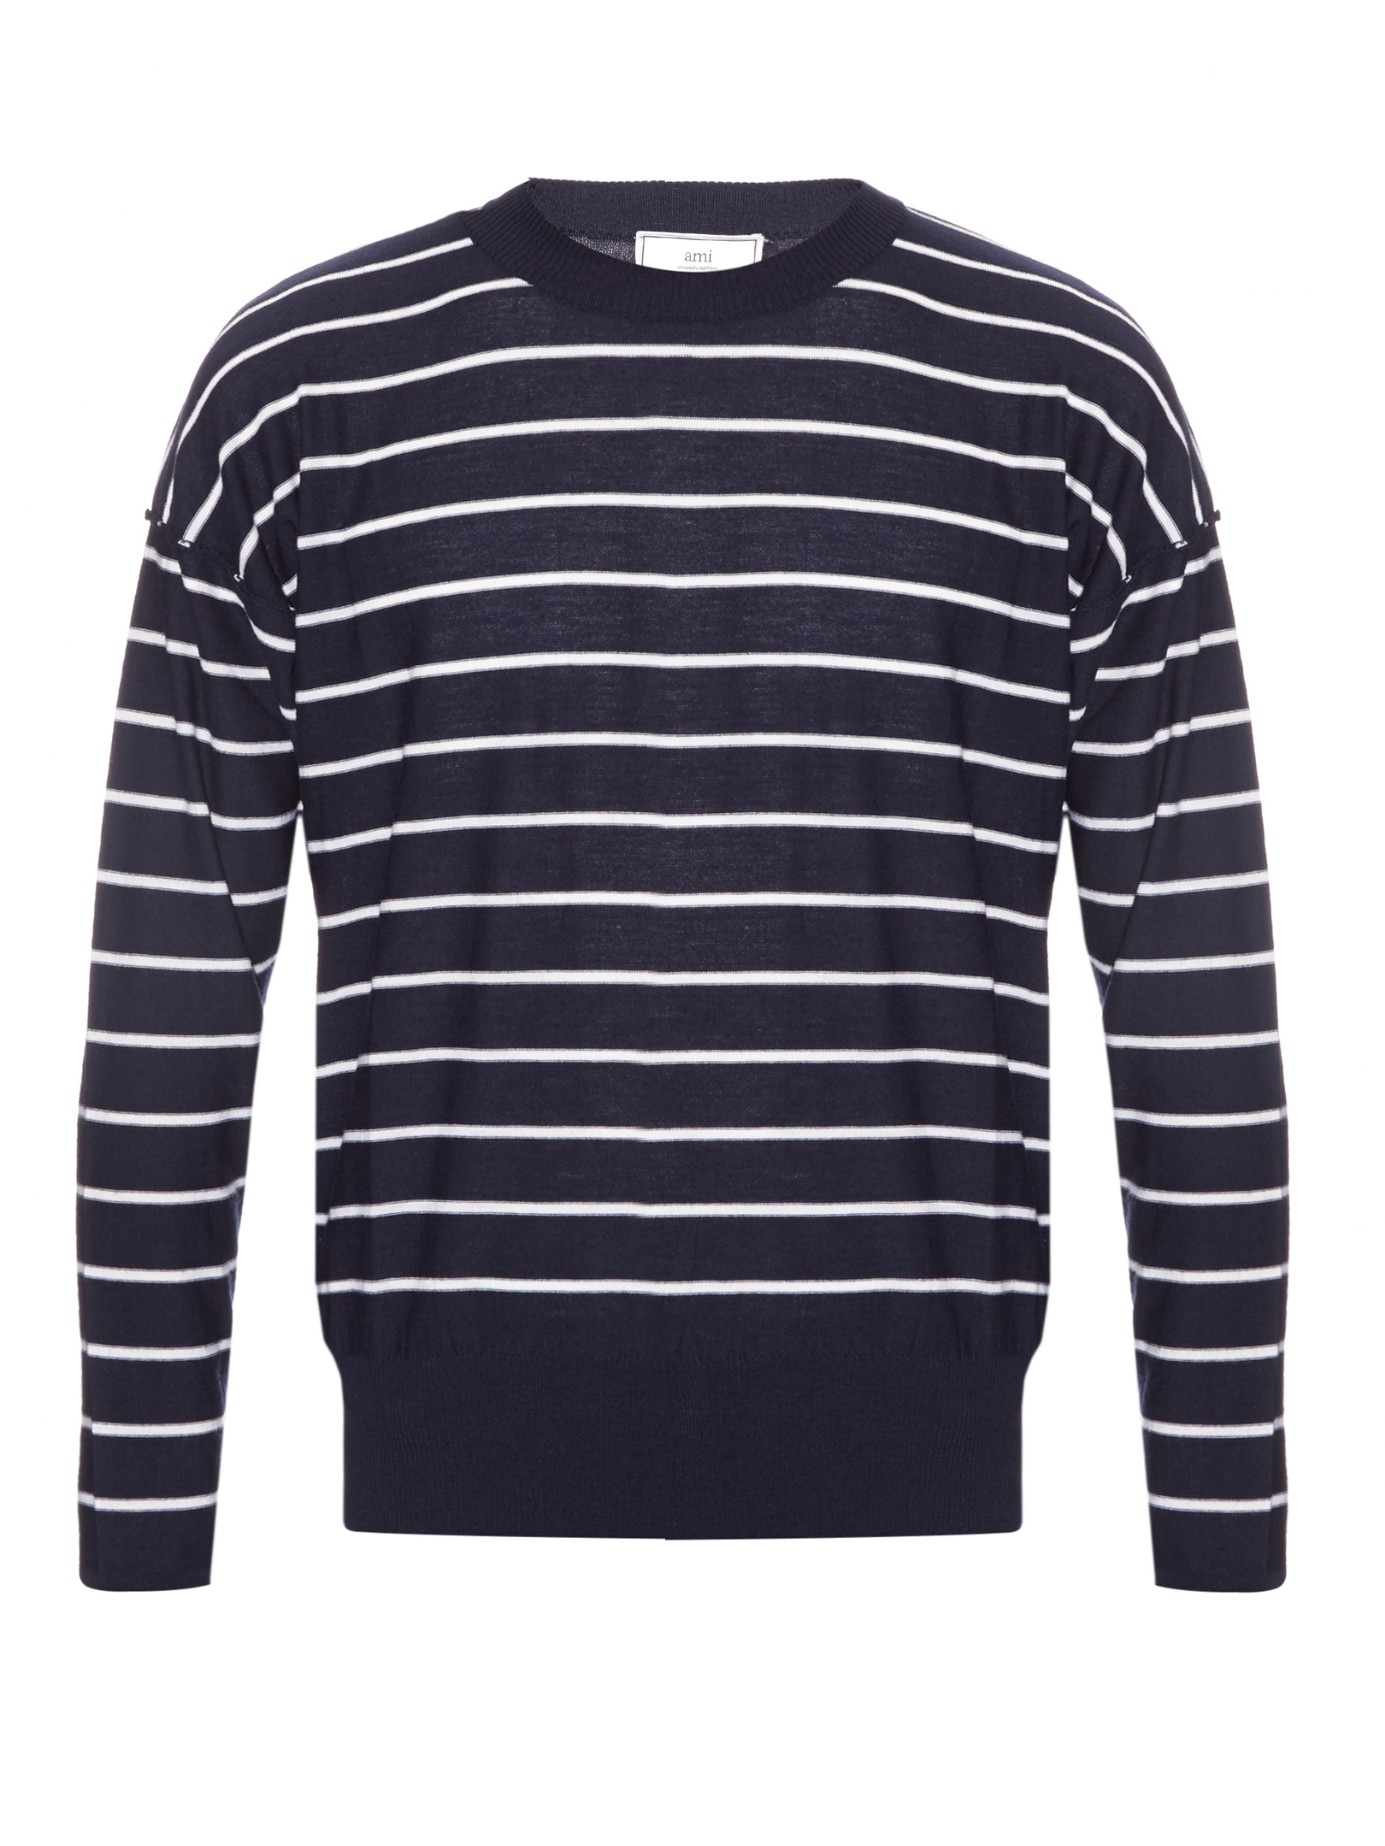 Lyst - AMI Long-sleeved Striped-wool Sweater in Blue for Men